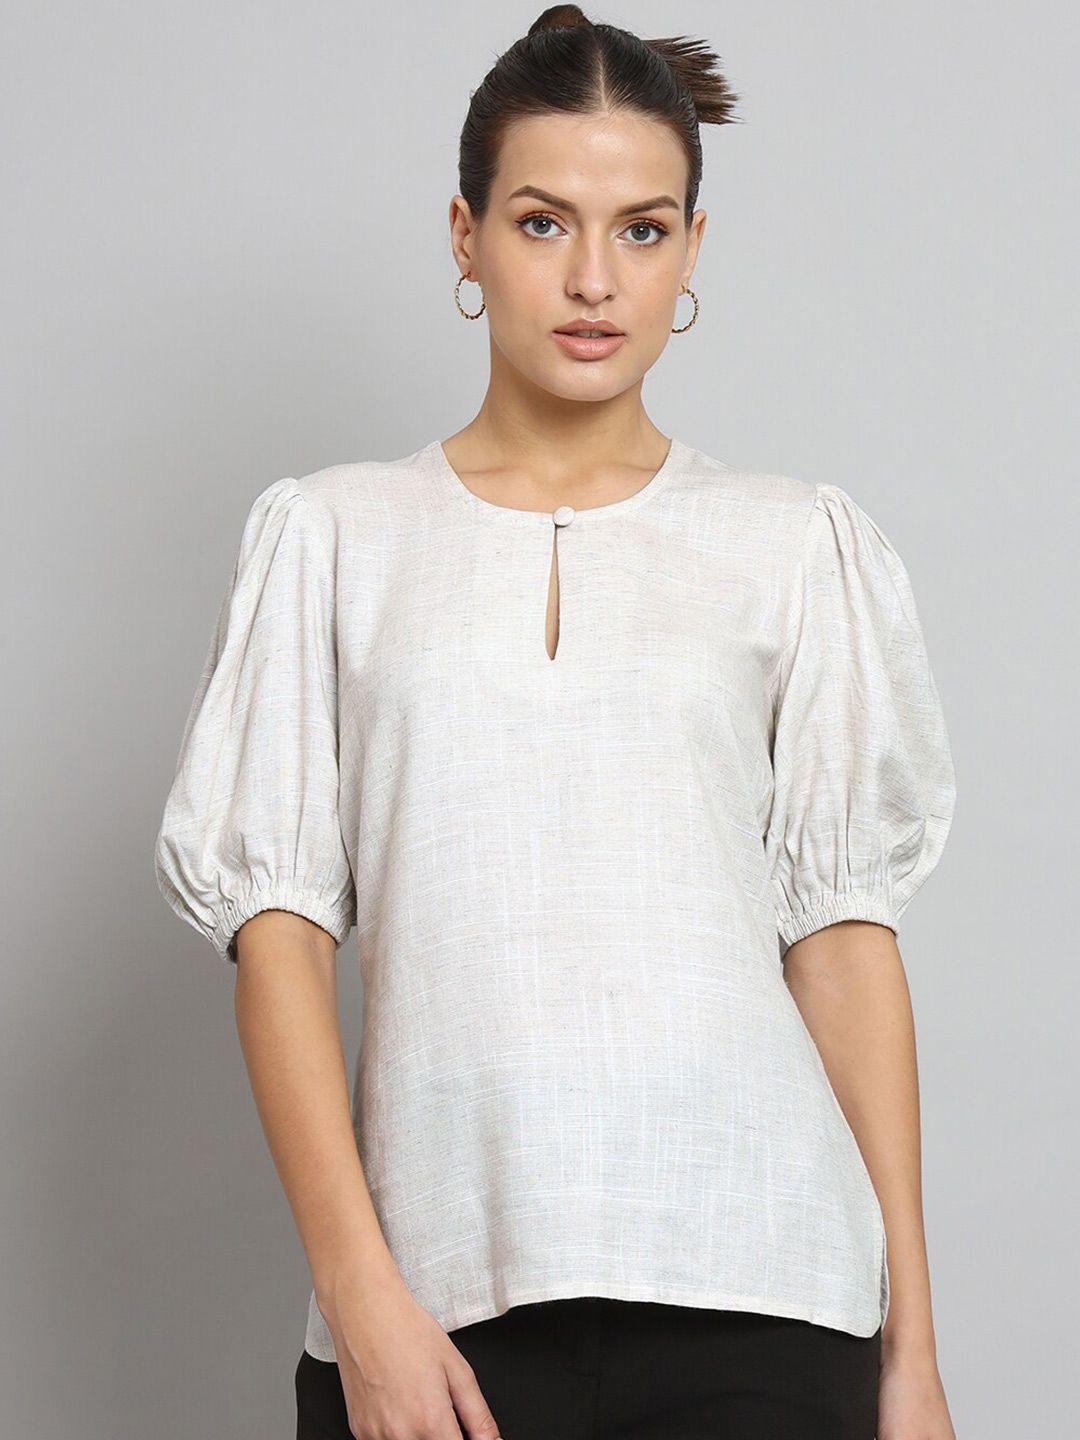 powersutra-keyhole-neck-puff-sleeves-top